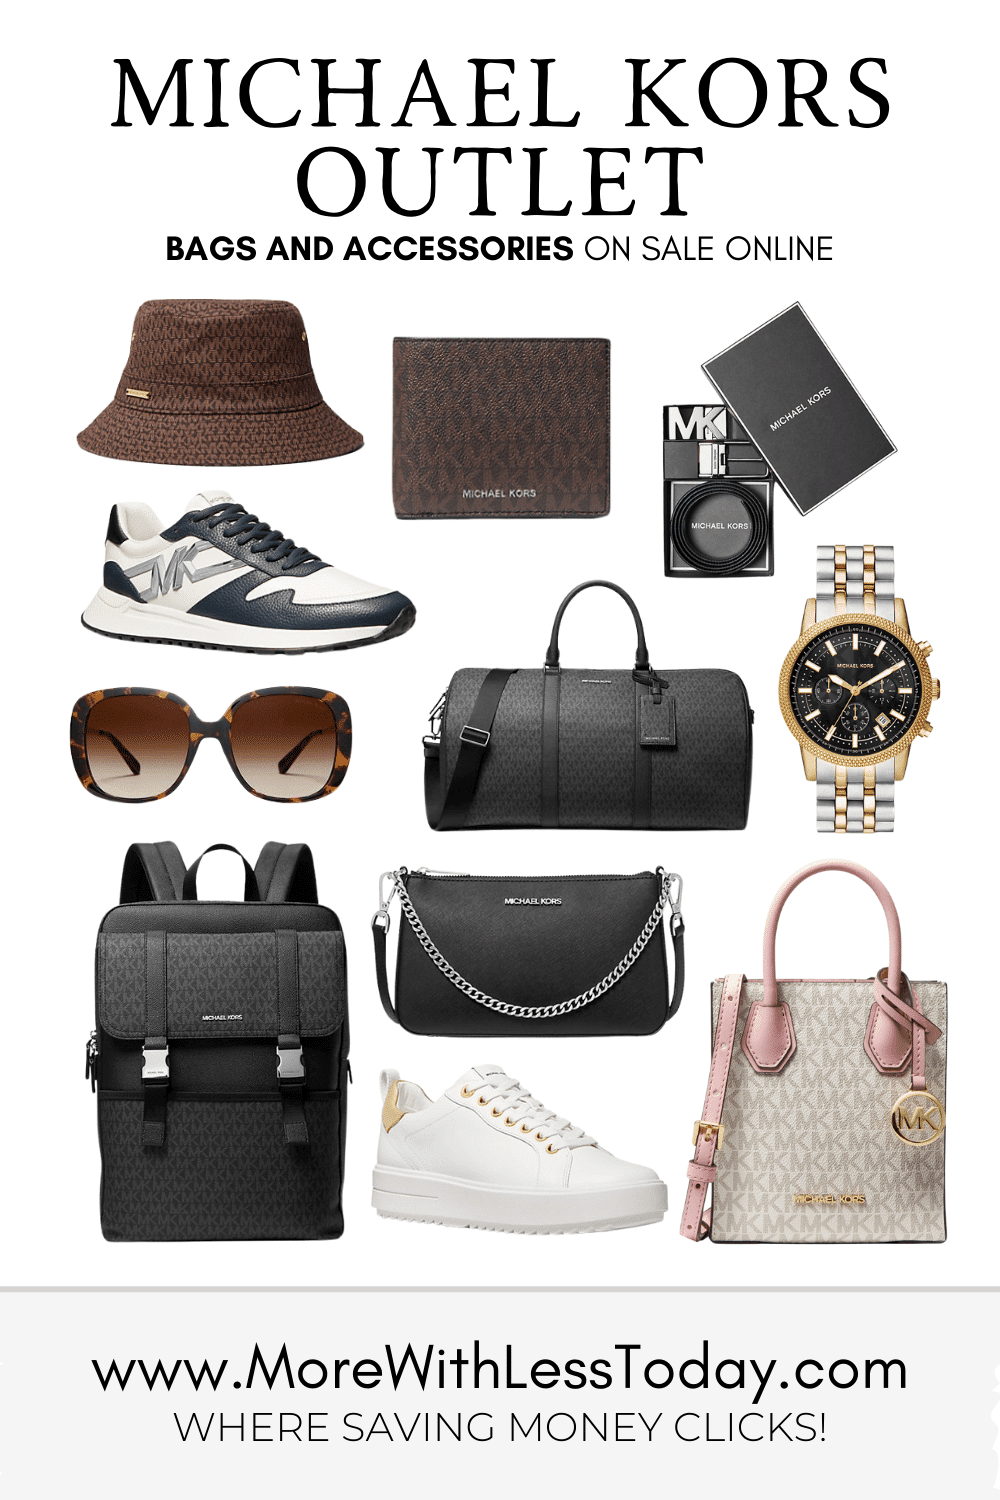 Bags and Accessories on Sale at Michael Kors Outlet Online - PIN